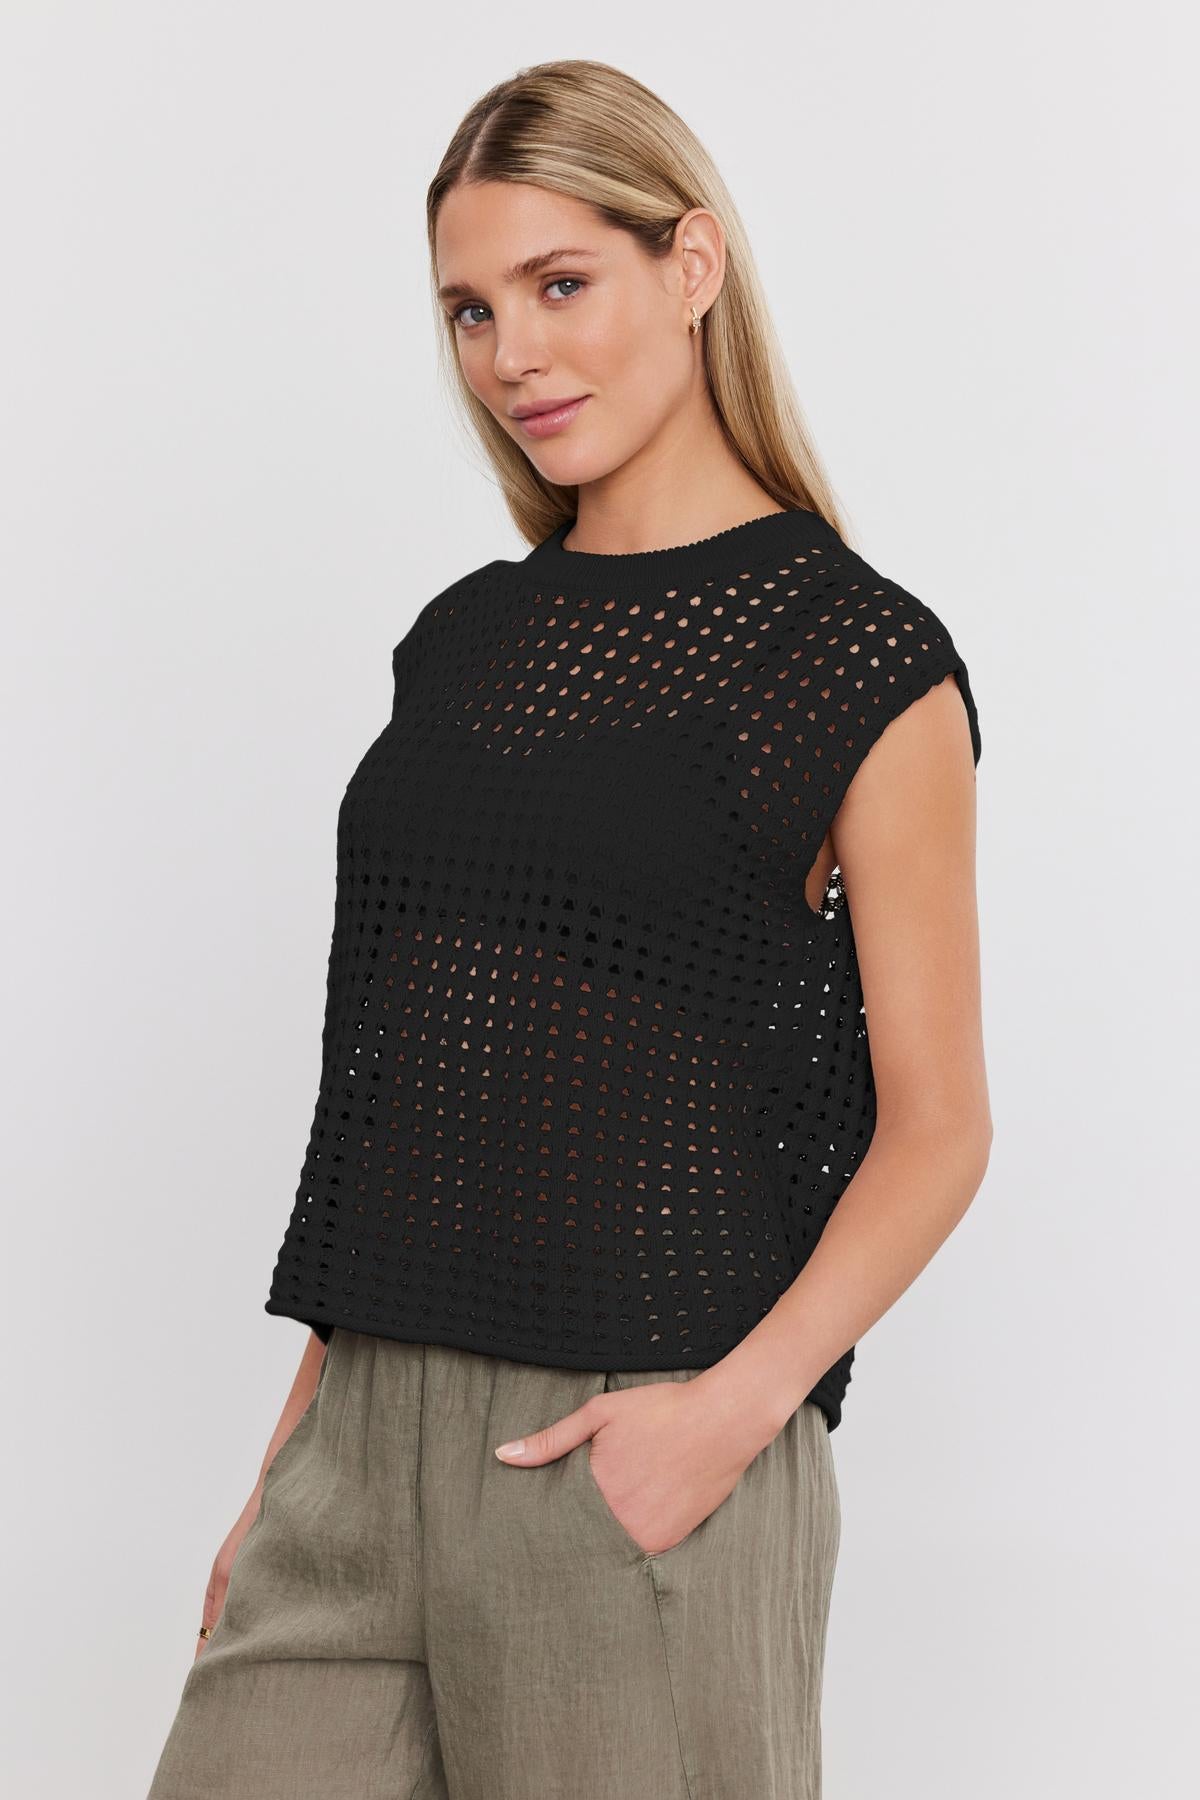 A person with long blonde hair wearing a black perforated top and khaki pants stands against a plain white background, showcasing the stylish MAISON SWEATER by Velvet by Graham & Spencer.-37054537892033